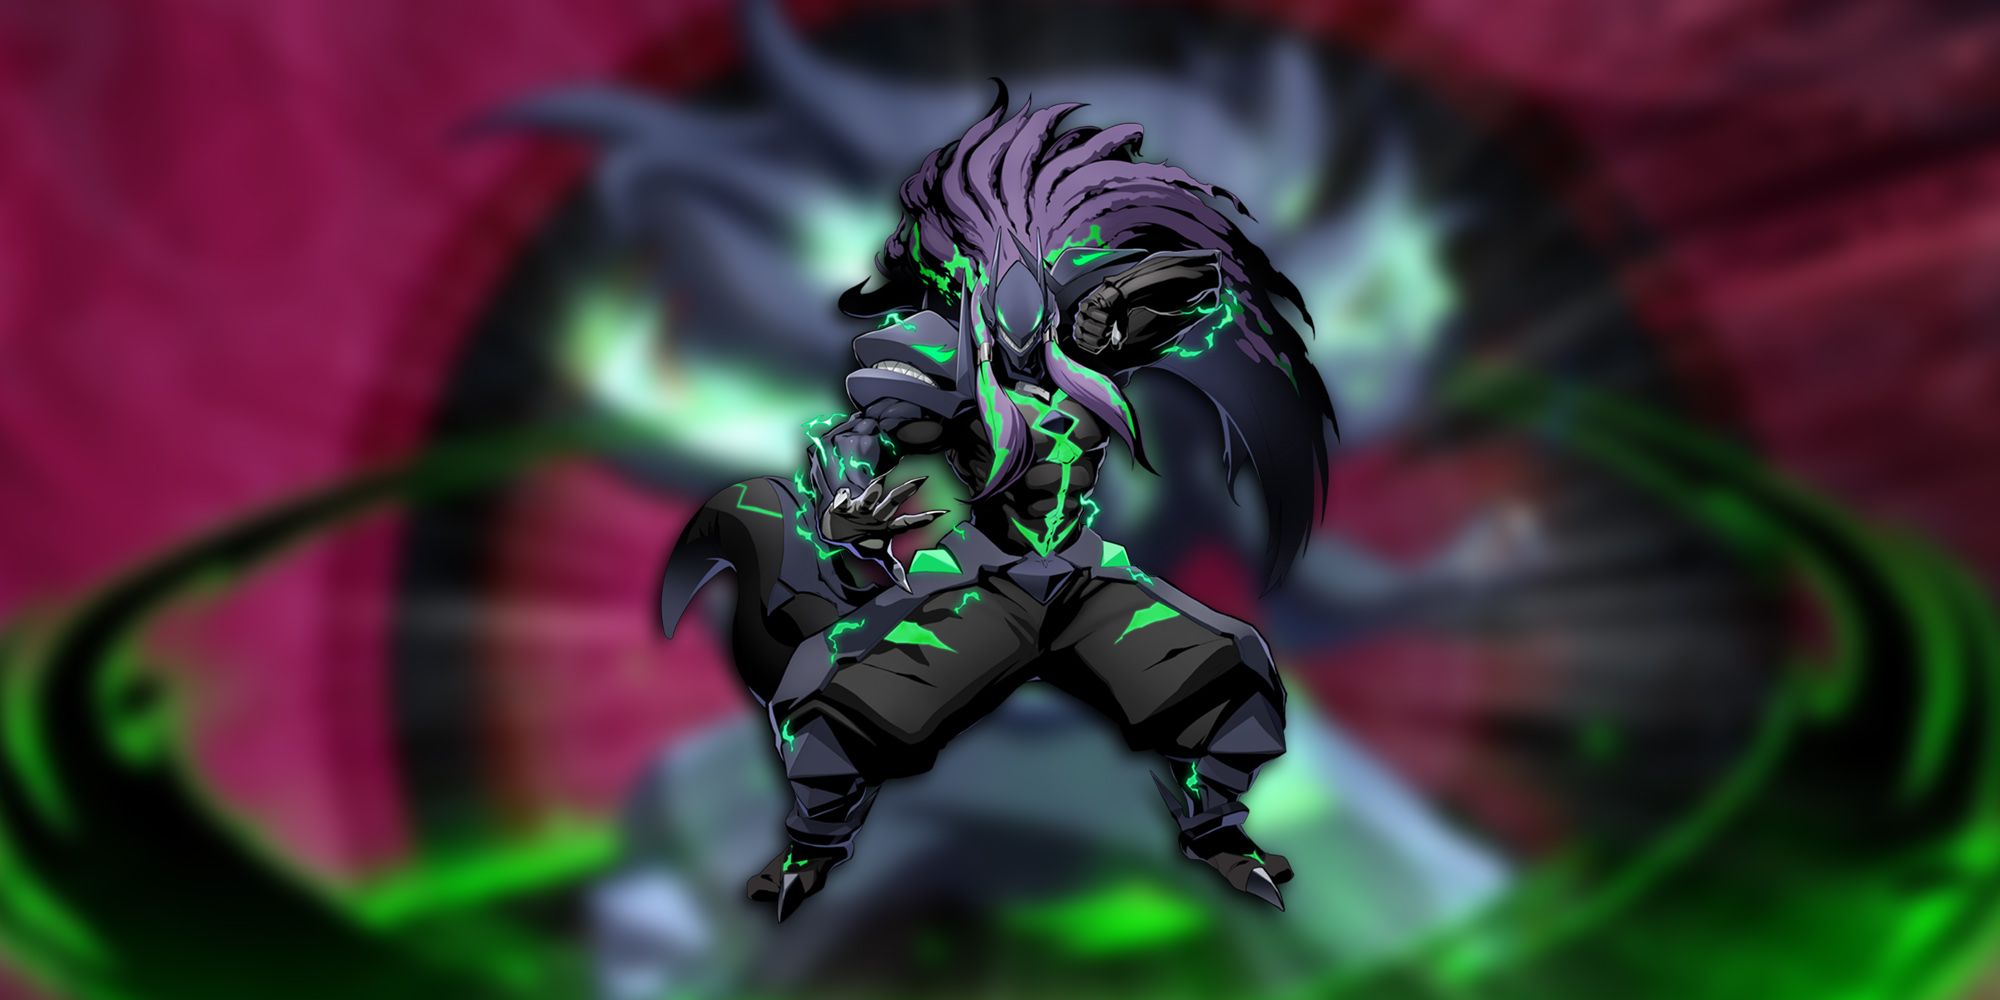 PNG Of Susanoo From BlazBlue Overlaid On Image Of Their Sprite In-Game